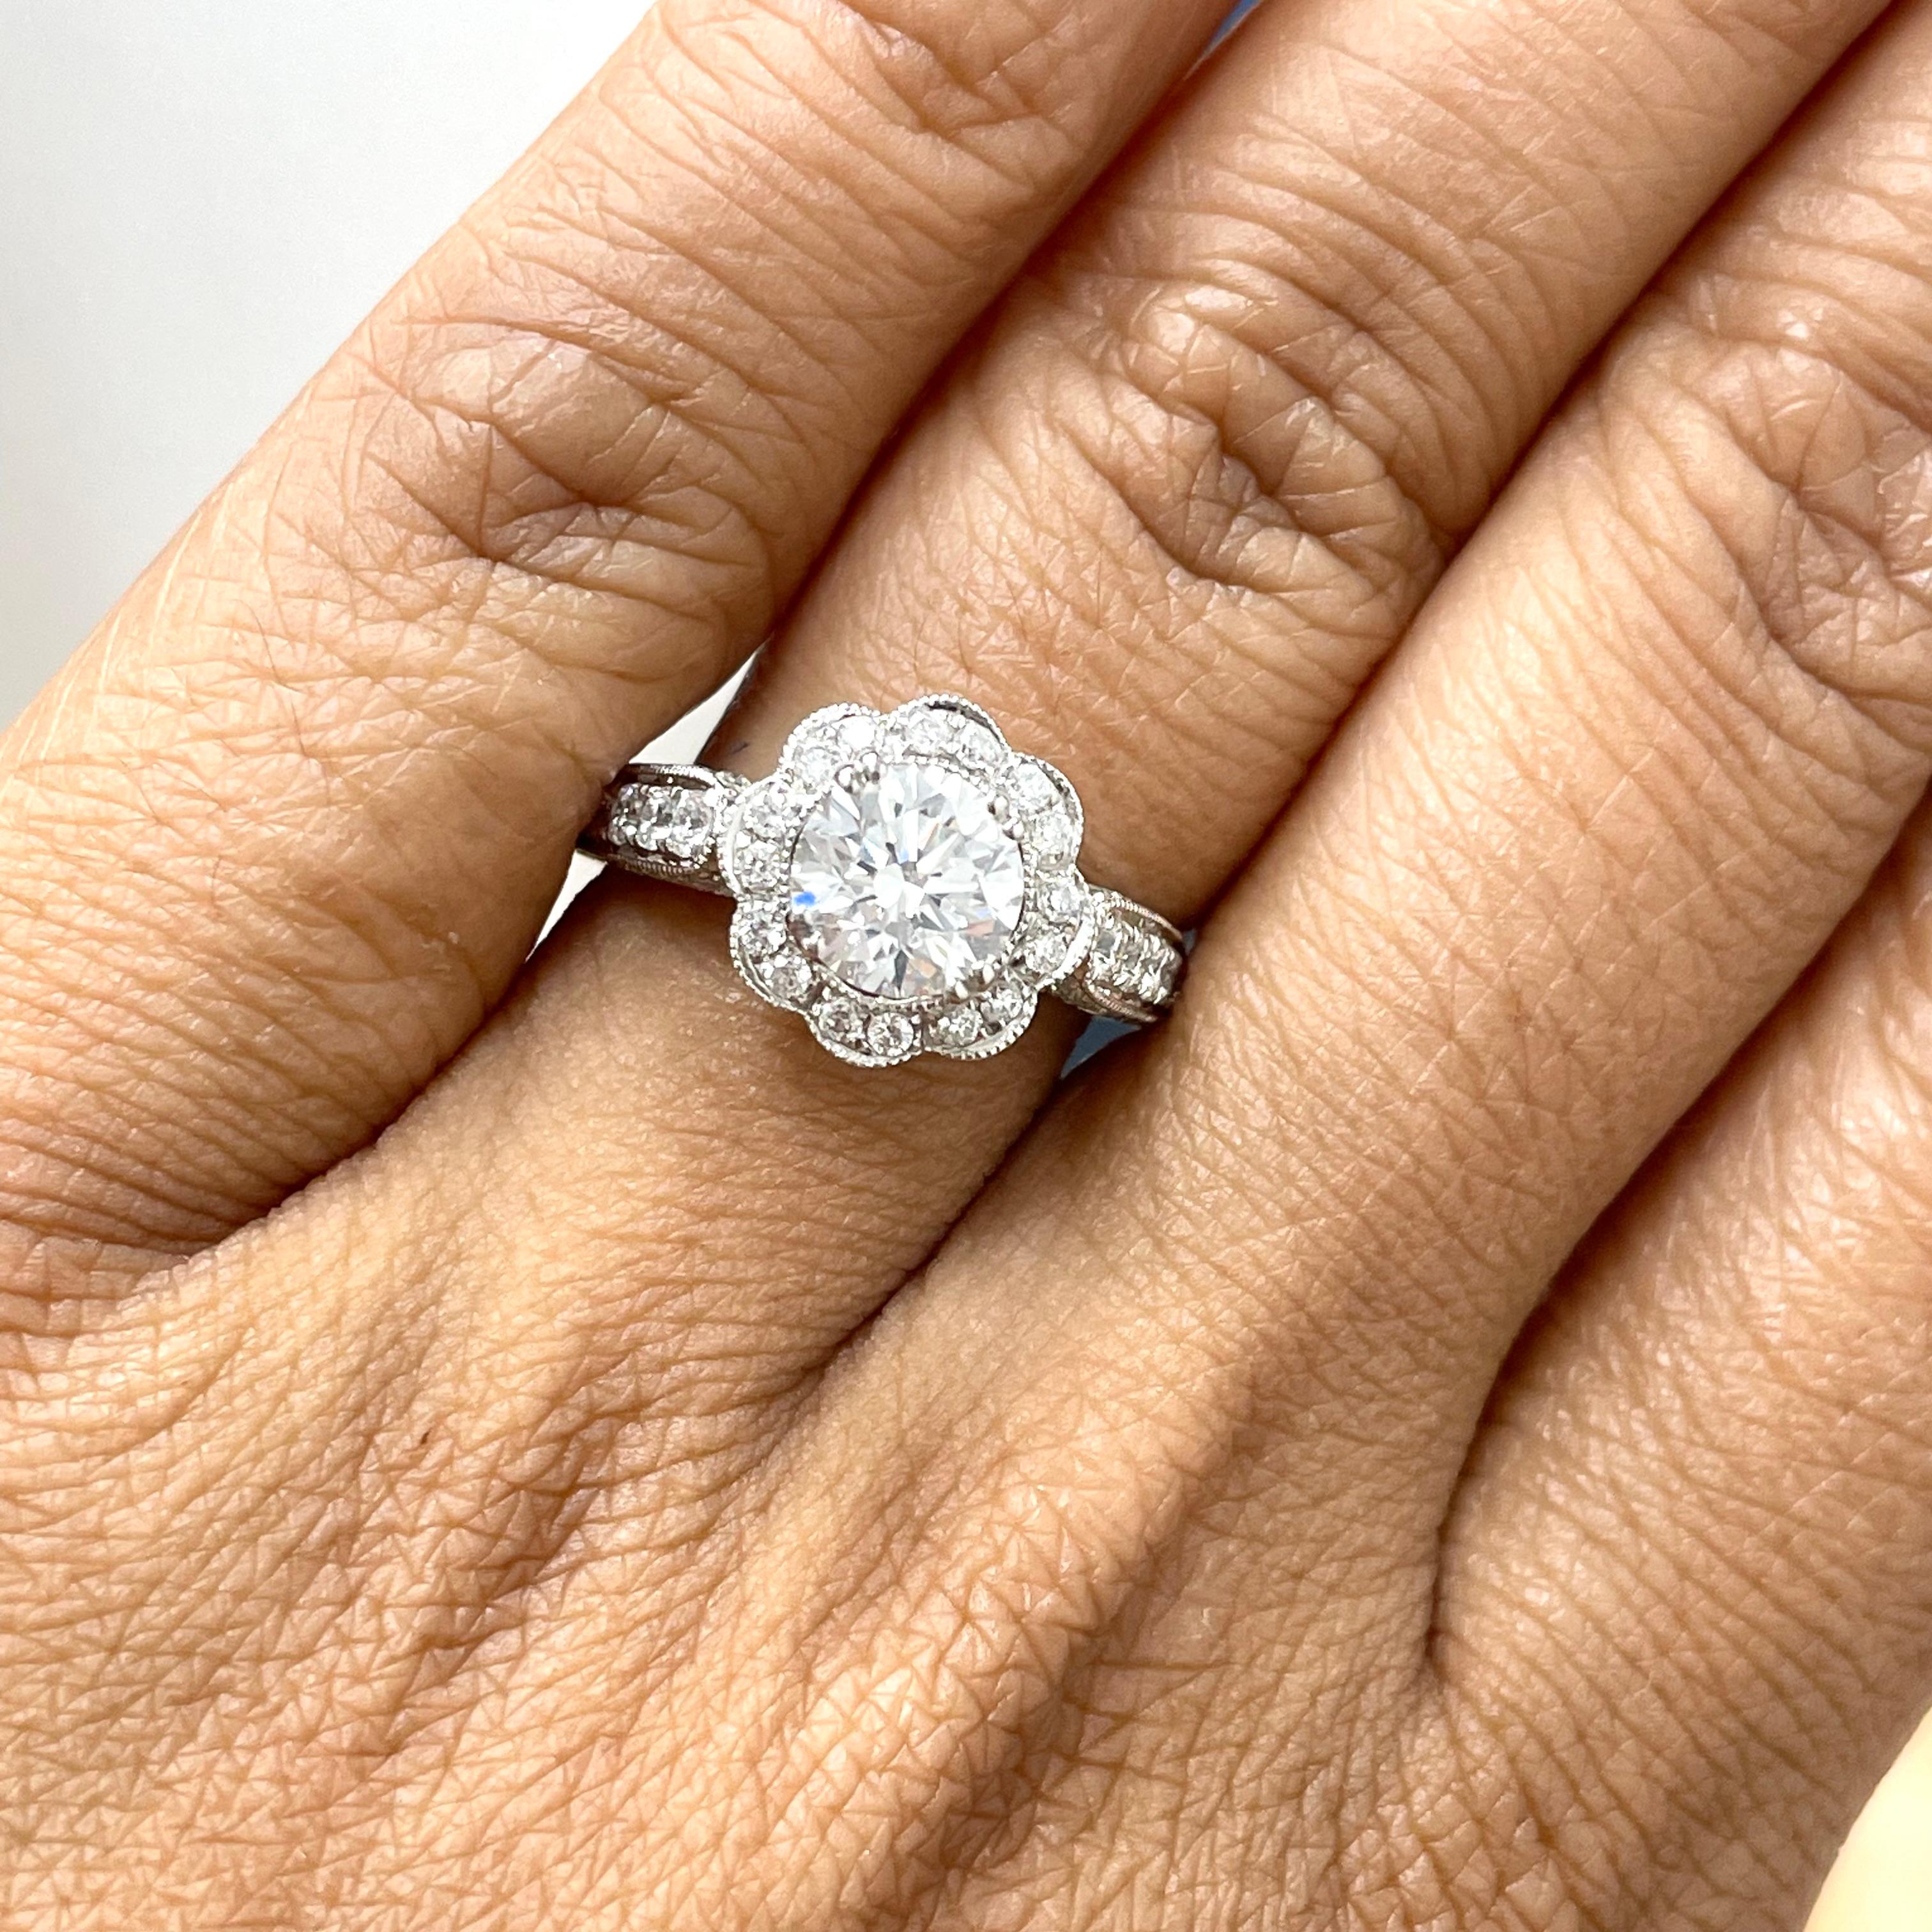 A flower shaped halo surrounds the solitaire with leaf like details on the basket. This inspired solitaire diamond engagement is floral and earthy in nature.

Center Diamond Shape: Round
Center Diamond Weight: 1.21 cts 
Diamond Color: G
Diamond